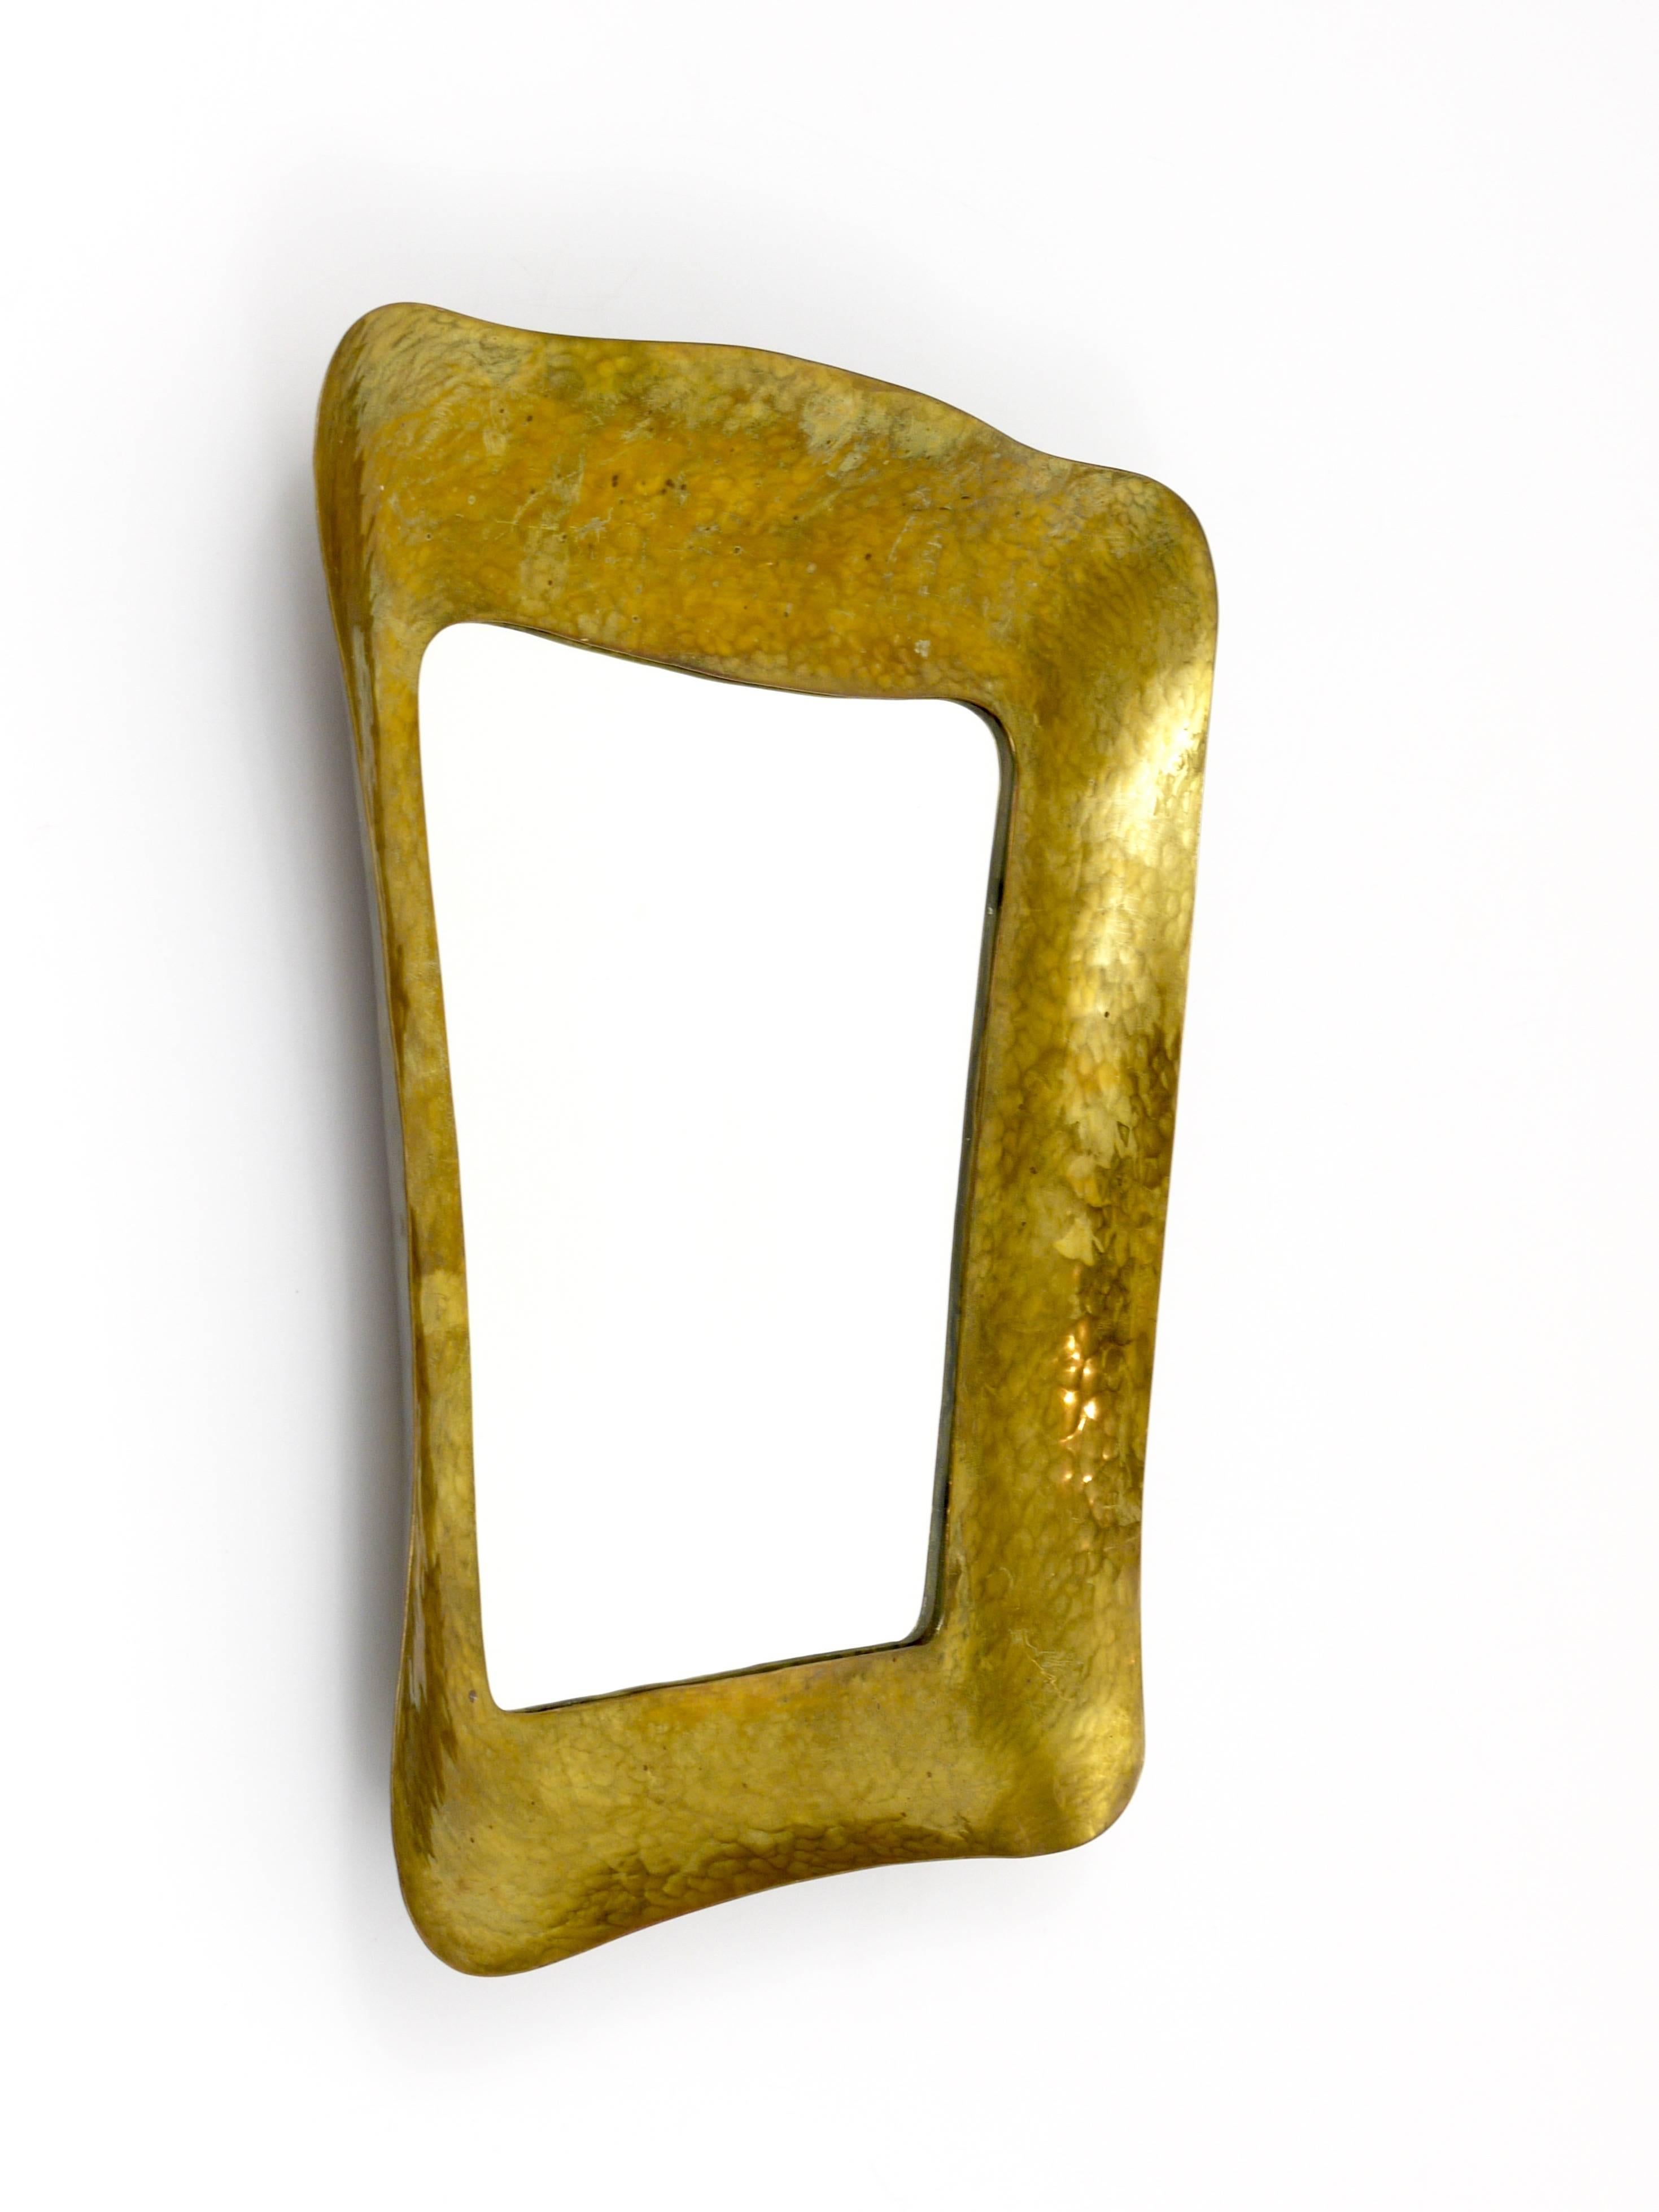 A beautiful handcrafted, hammer-blown modernist wall mirror, made of brass. Made in Austria in the 1950s. In excellent condition with nice patina.